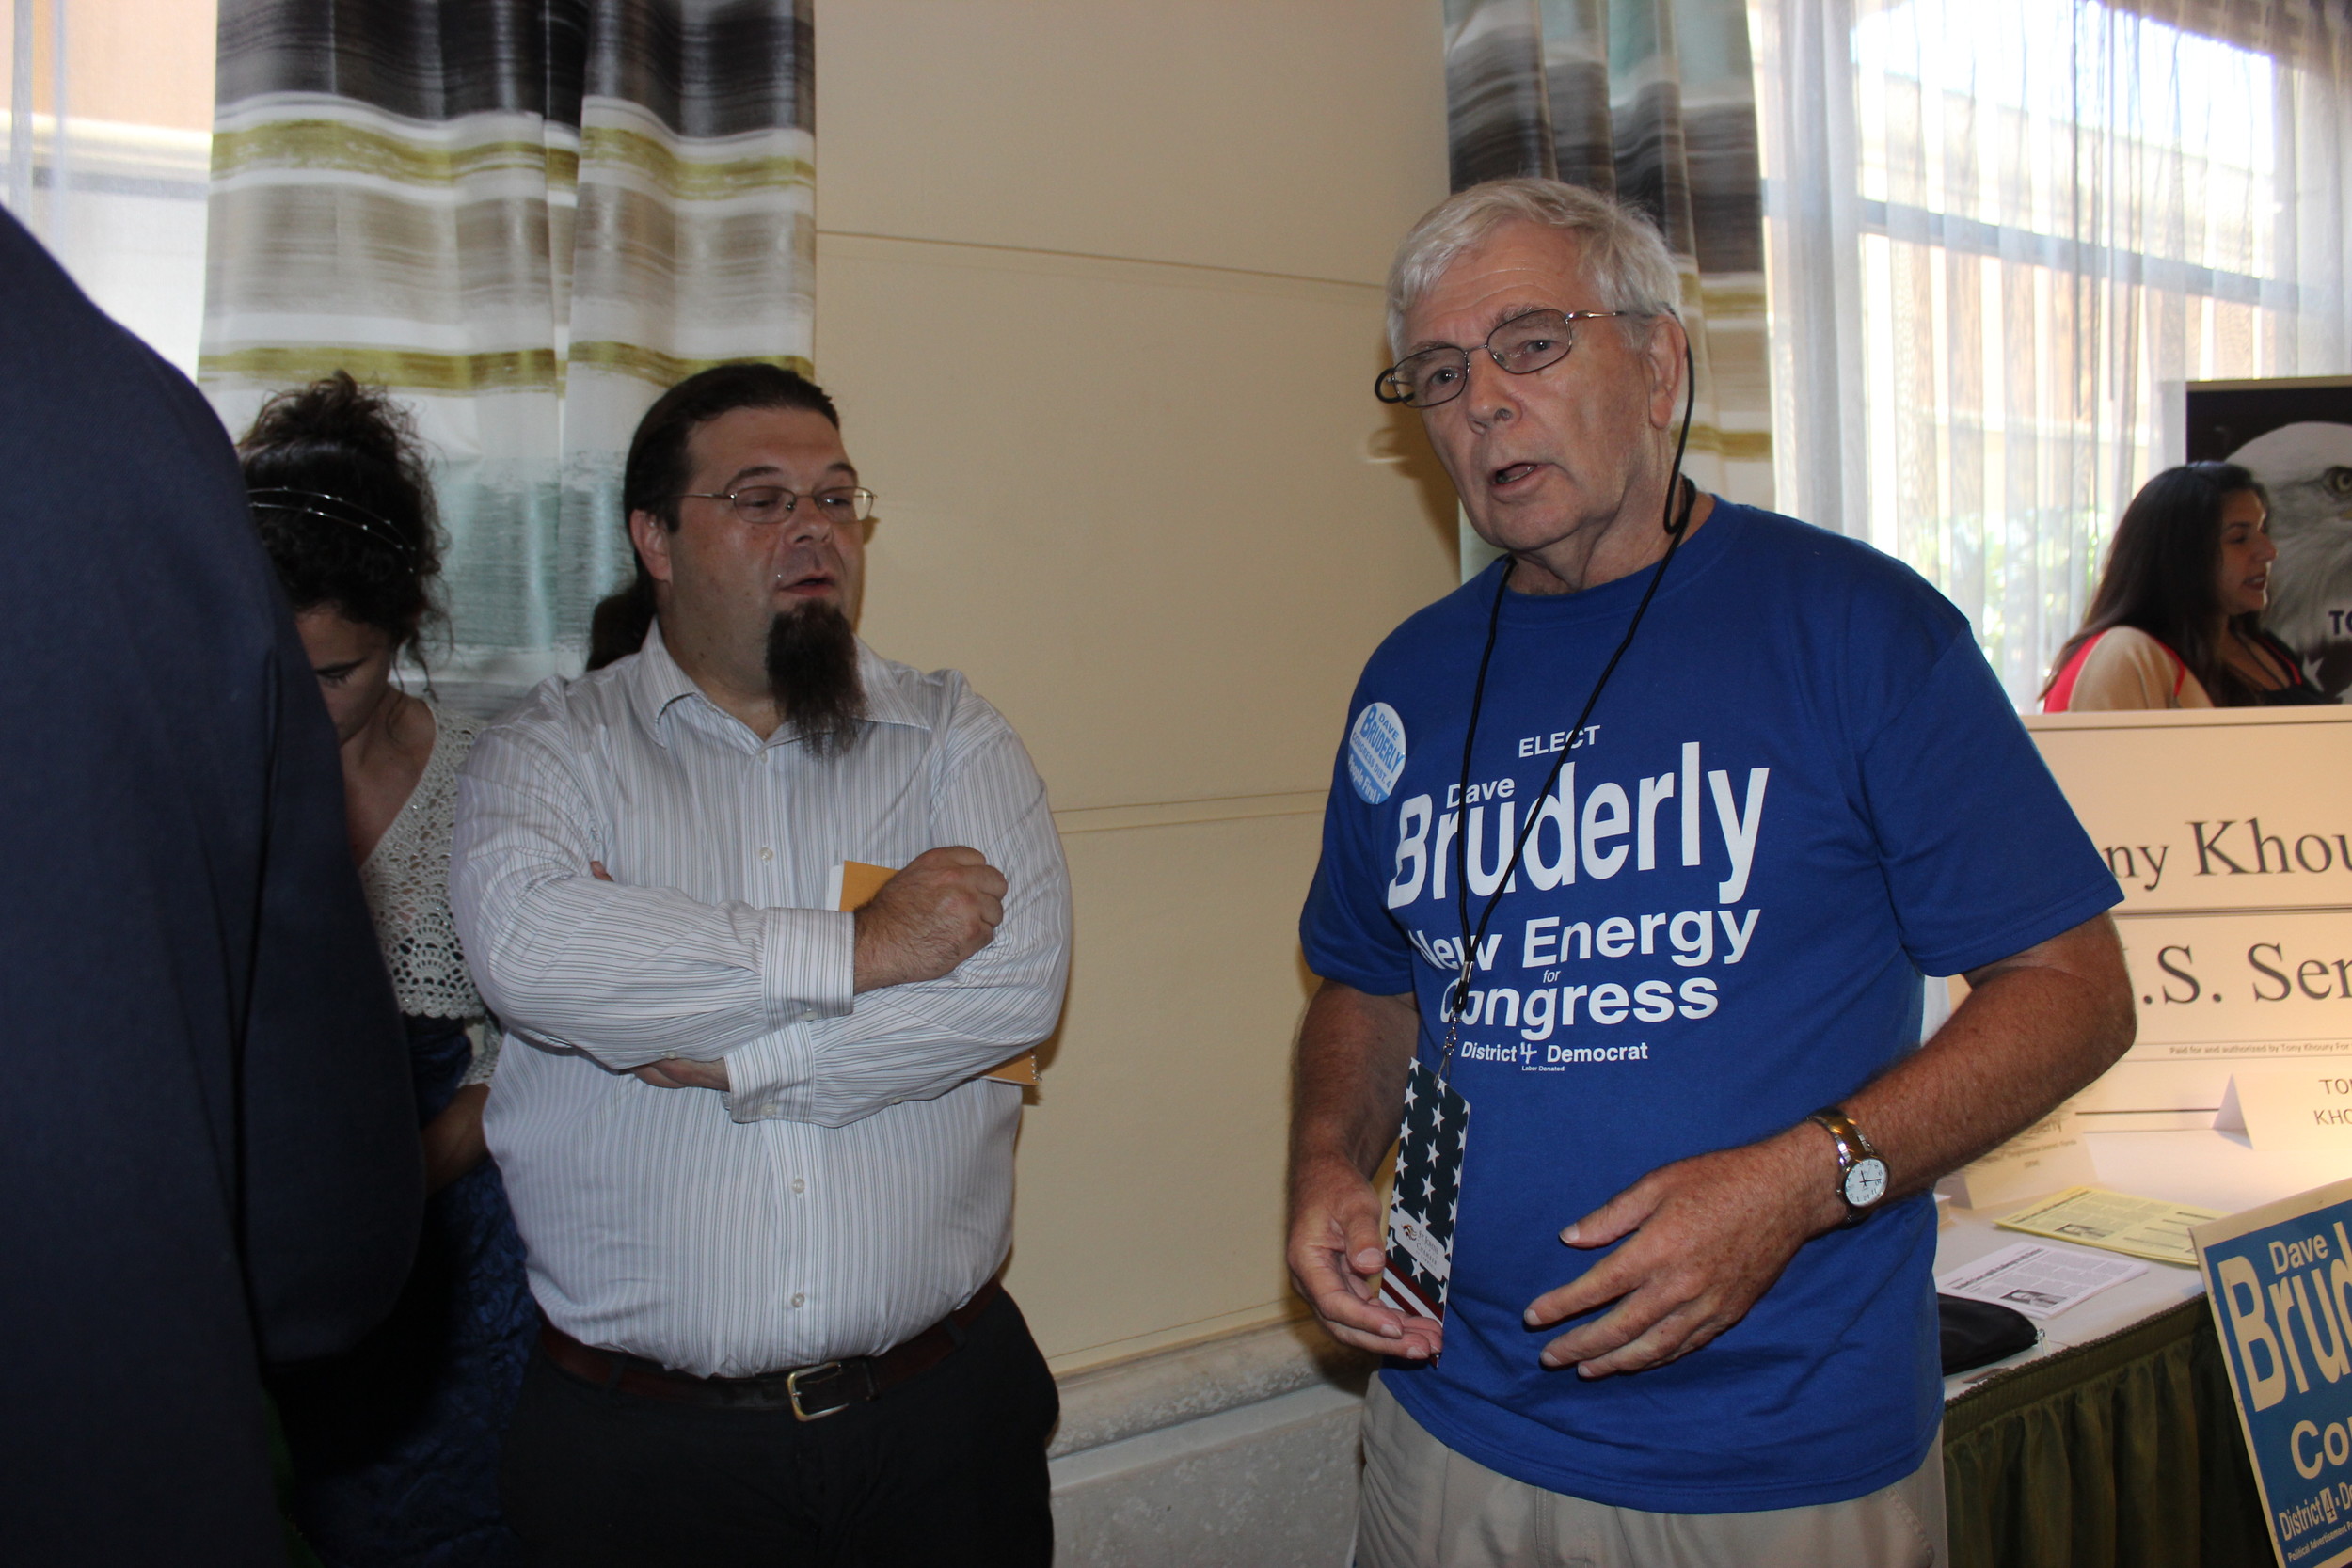 Democratic congressional candidate Dave Bruderly talks with local Democrats.